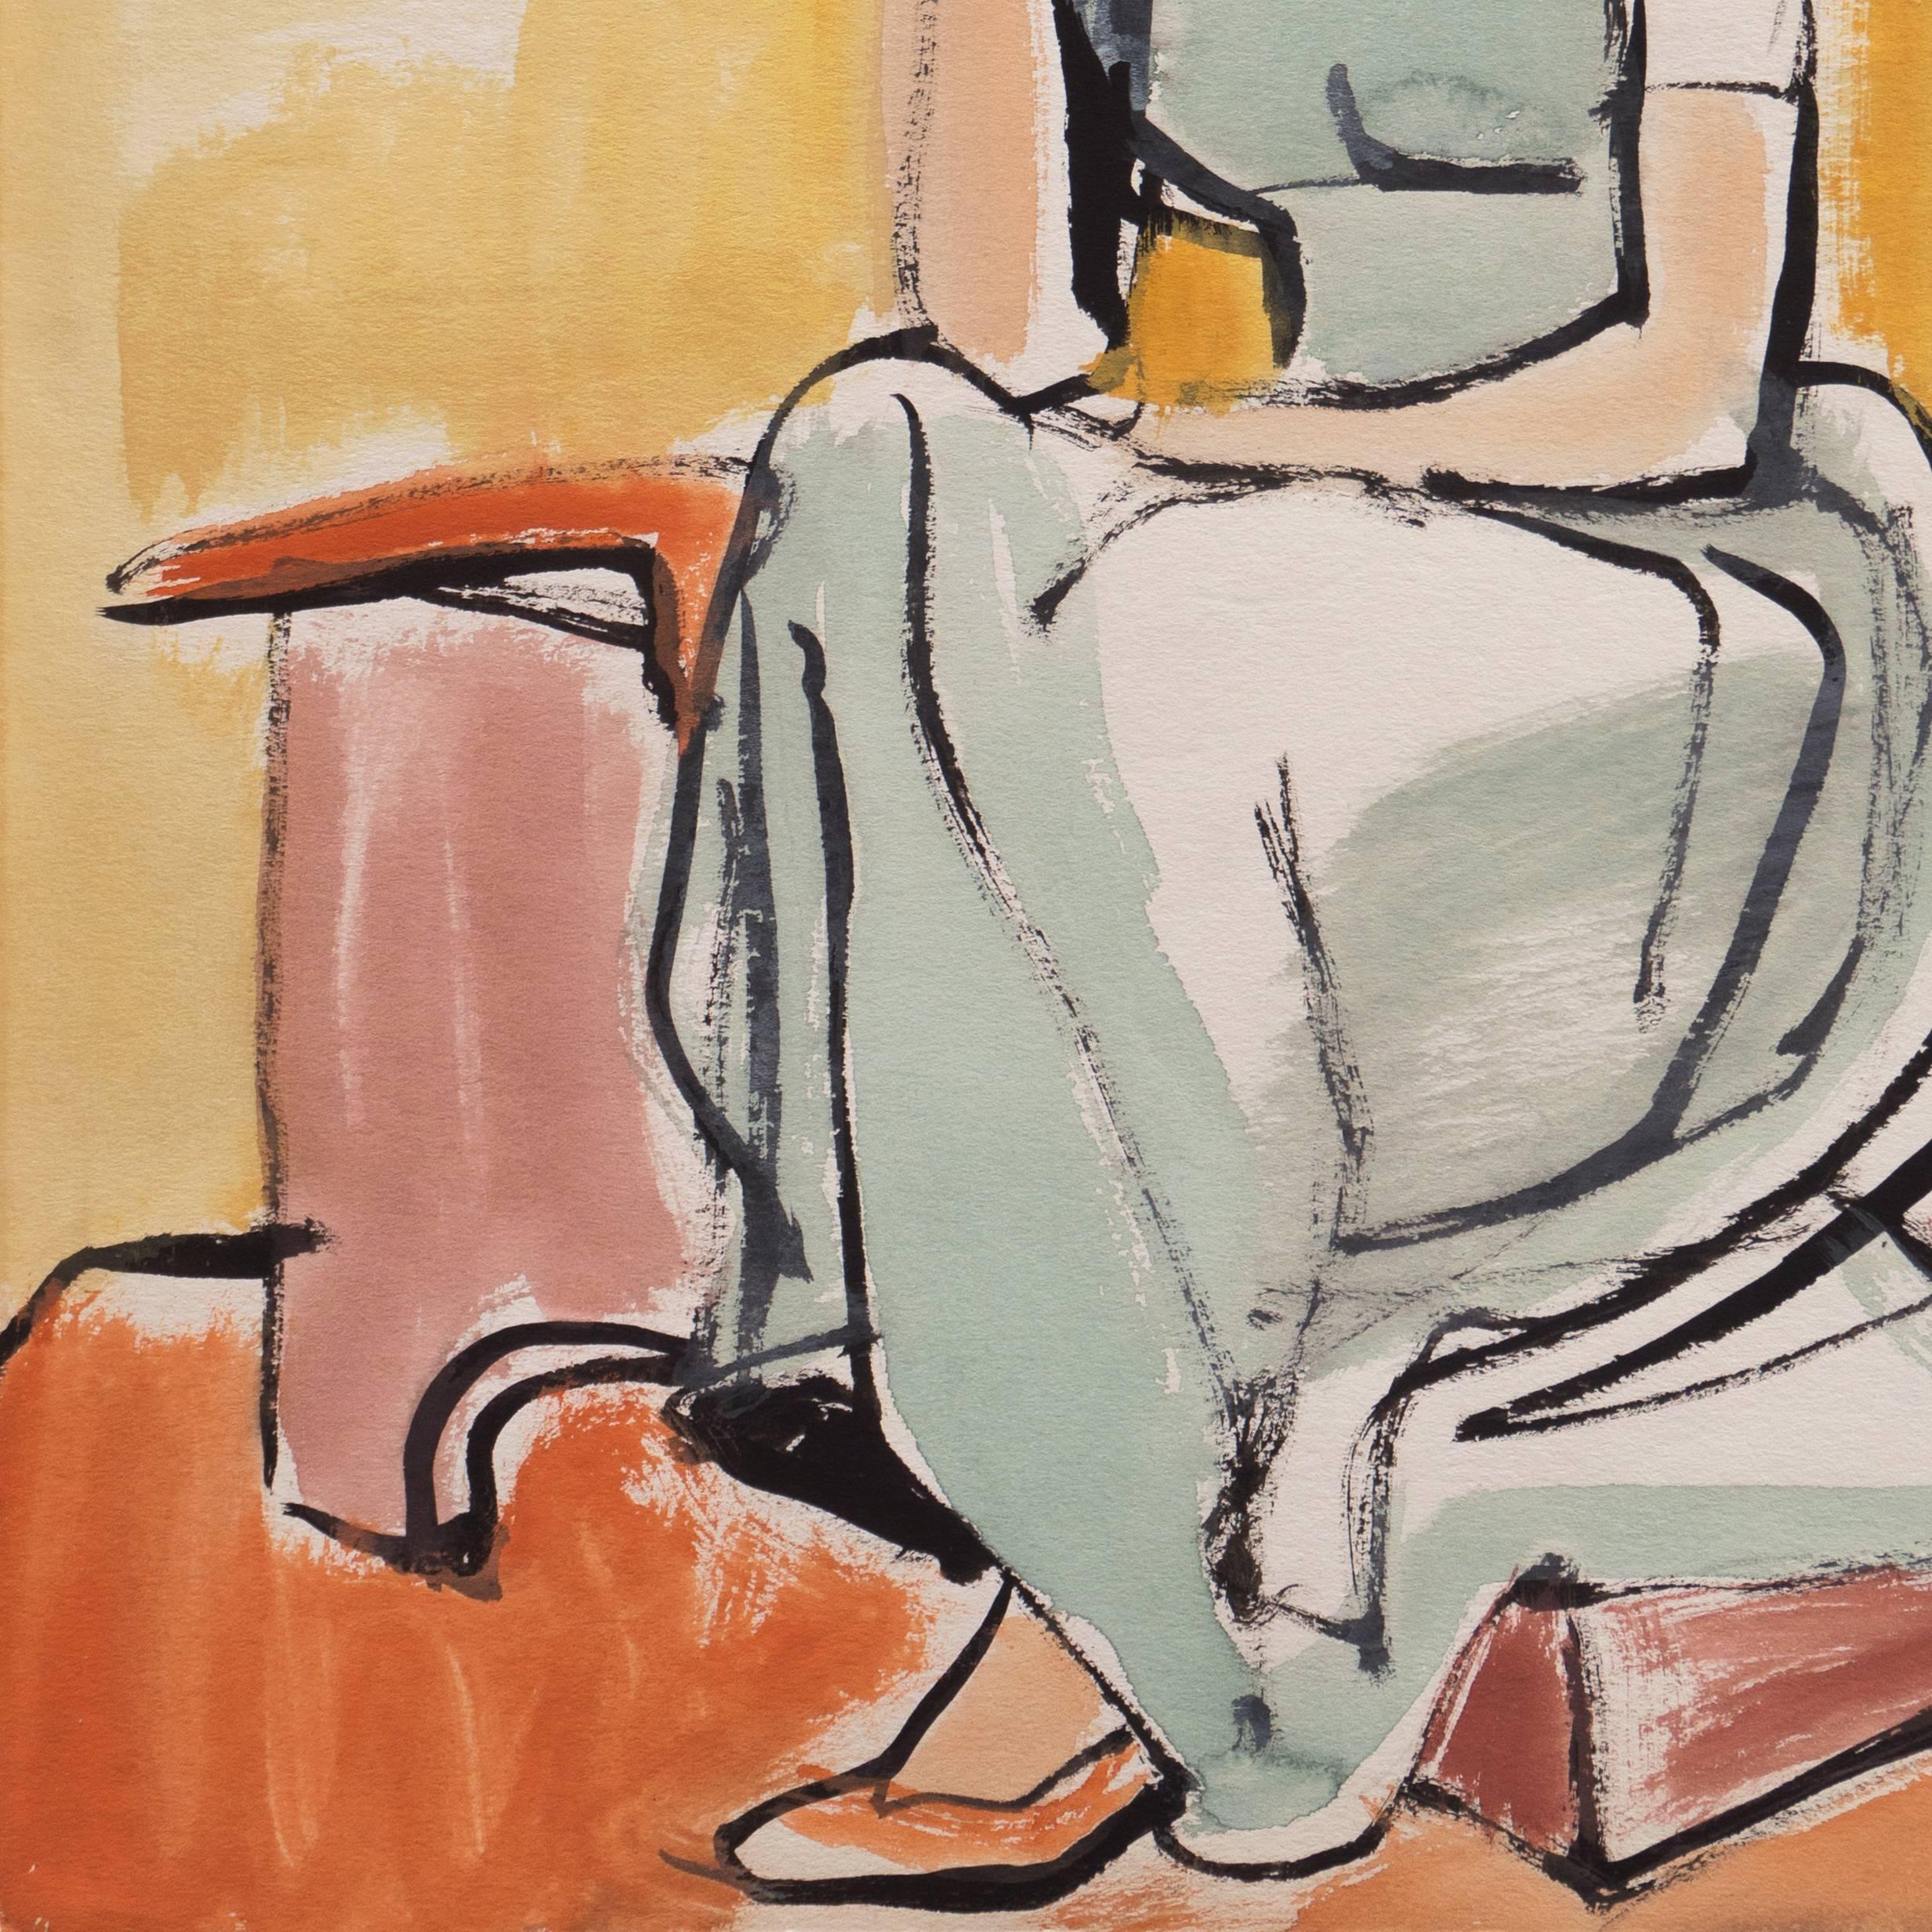 Certification of Authenticity stamped verso for Jerry Opper (American, 1914-2014).

A lyrical, American modernist view of a young woman shown seated in an interior, gazing towards the viewer with her chin resting pensively on her hand.

Born in